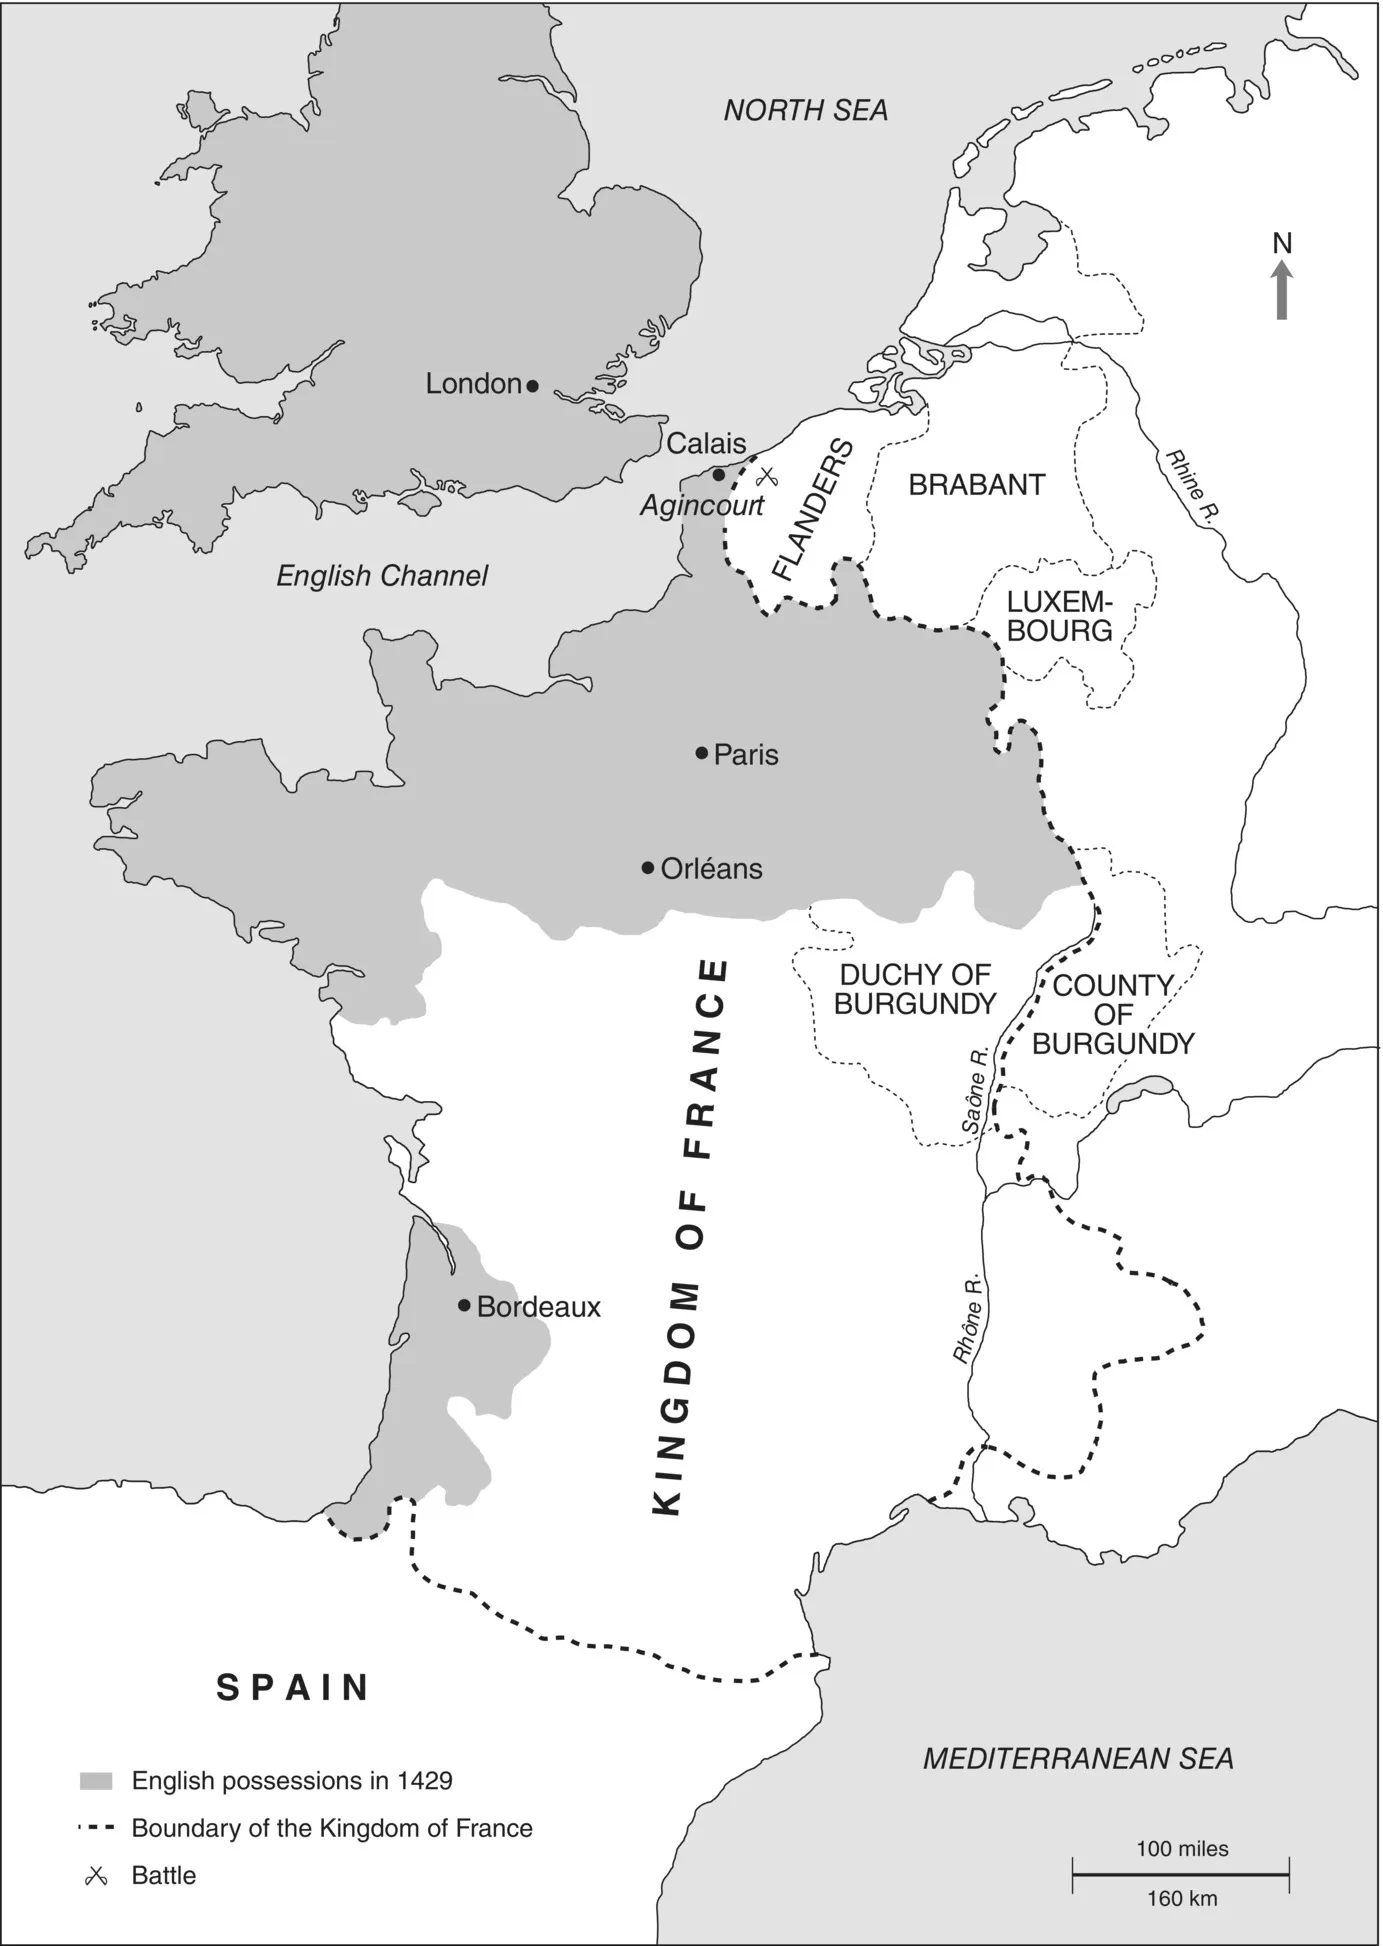 Map of the southern England and western France during the later Middle Ages with markers for English possessions in 1429 (gray rectangular box), boundary of the Kingdom of France (dashed line), and battle (crossed swords).